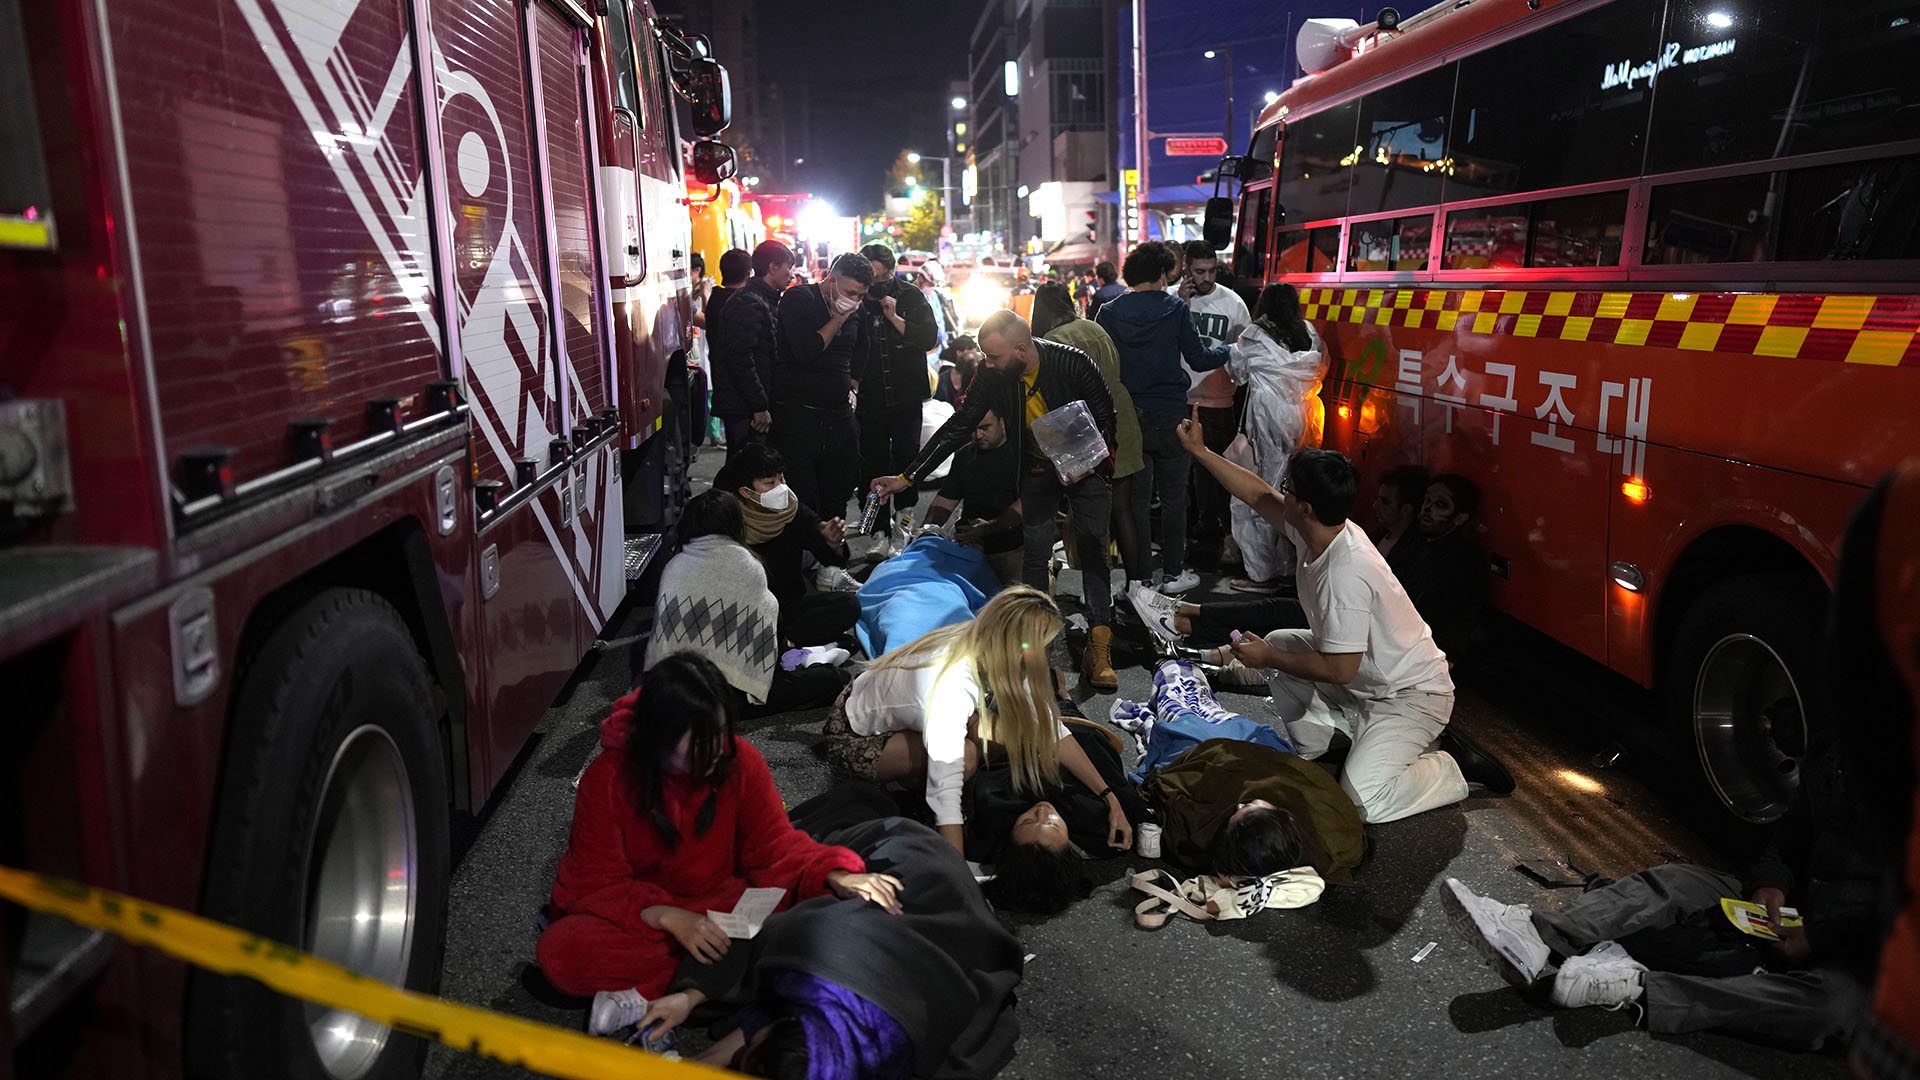 Firefighters attend to victims lying in the streets